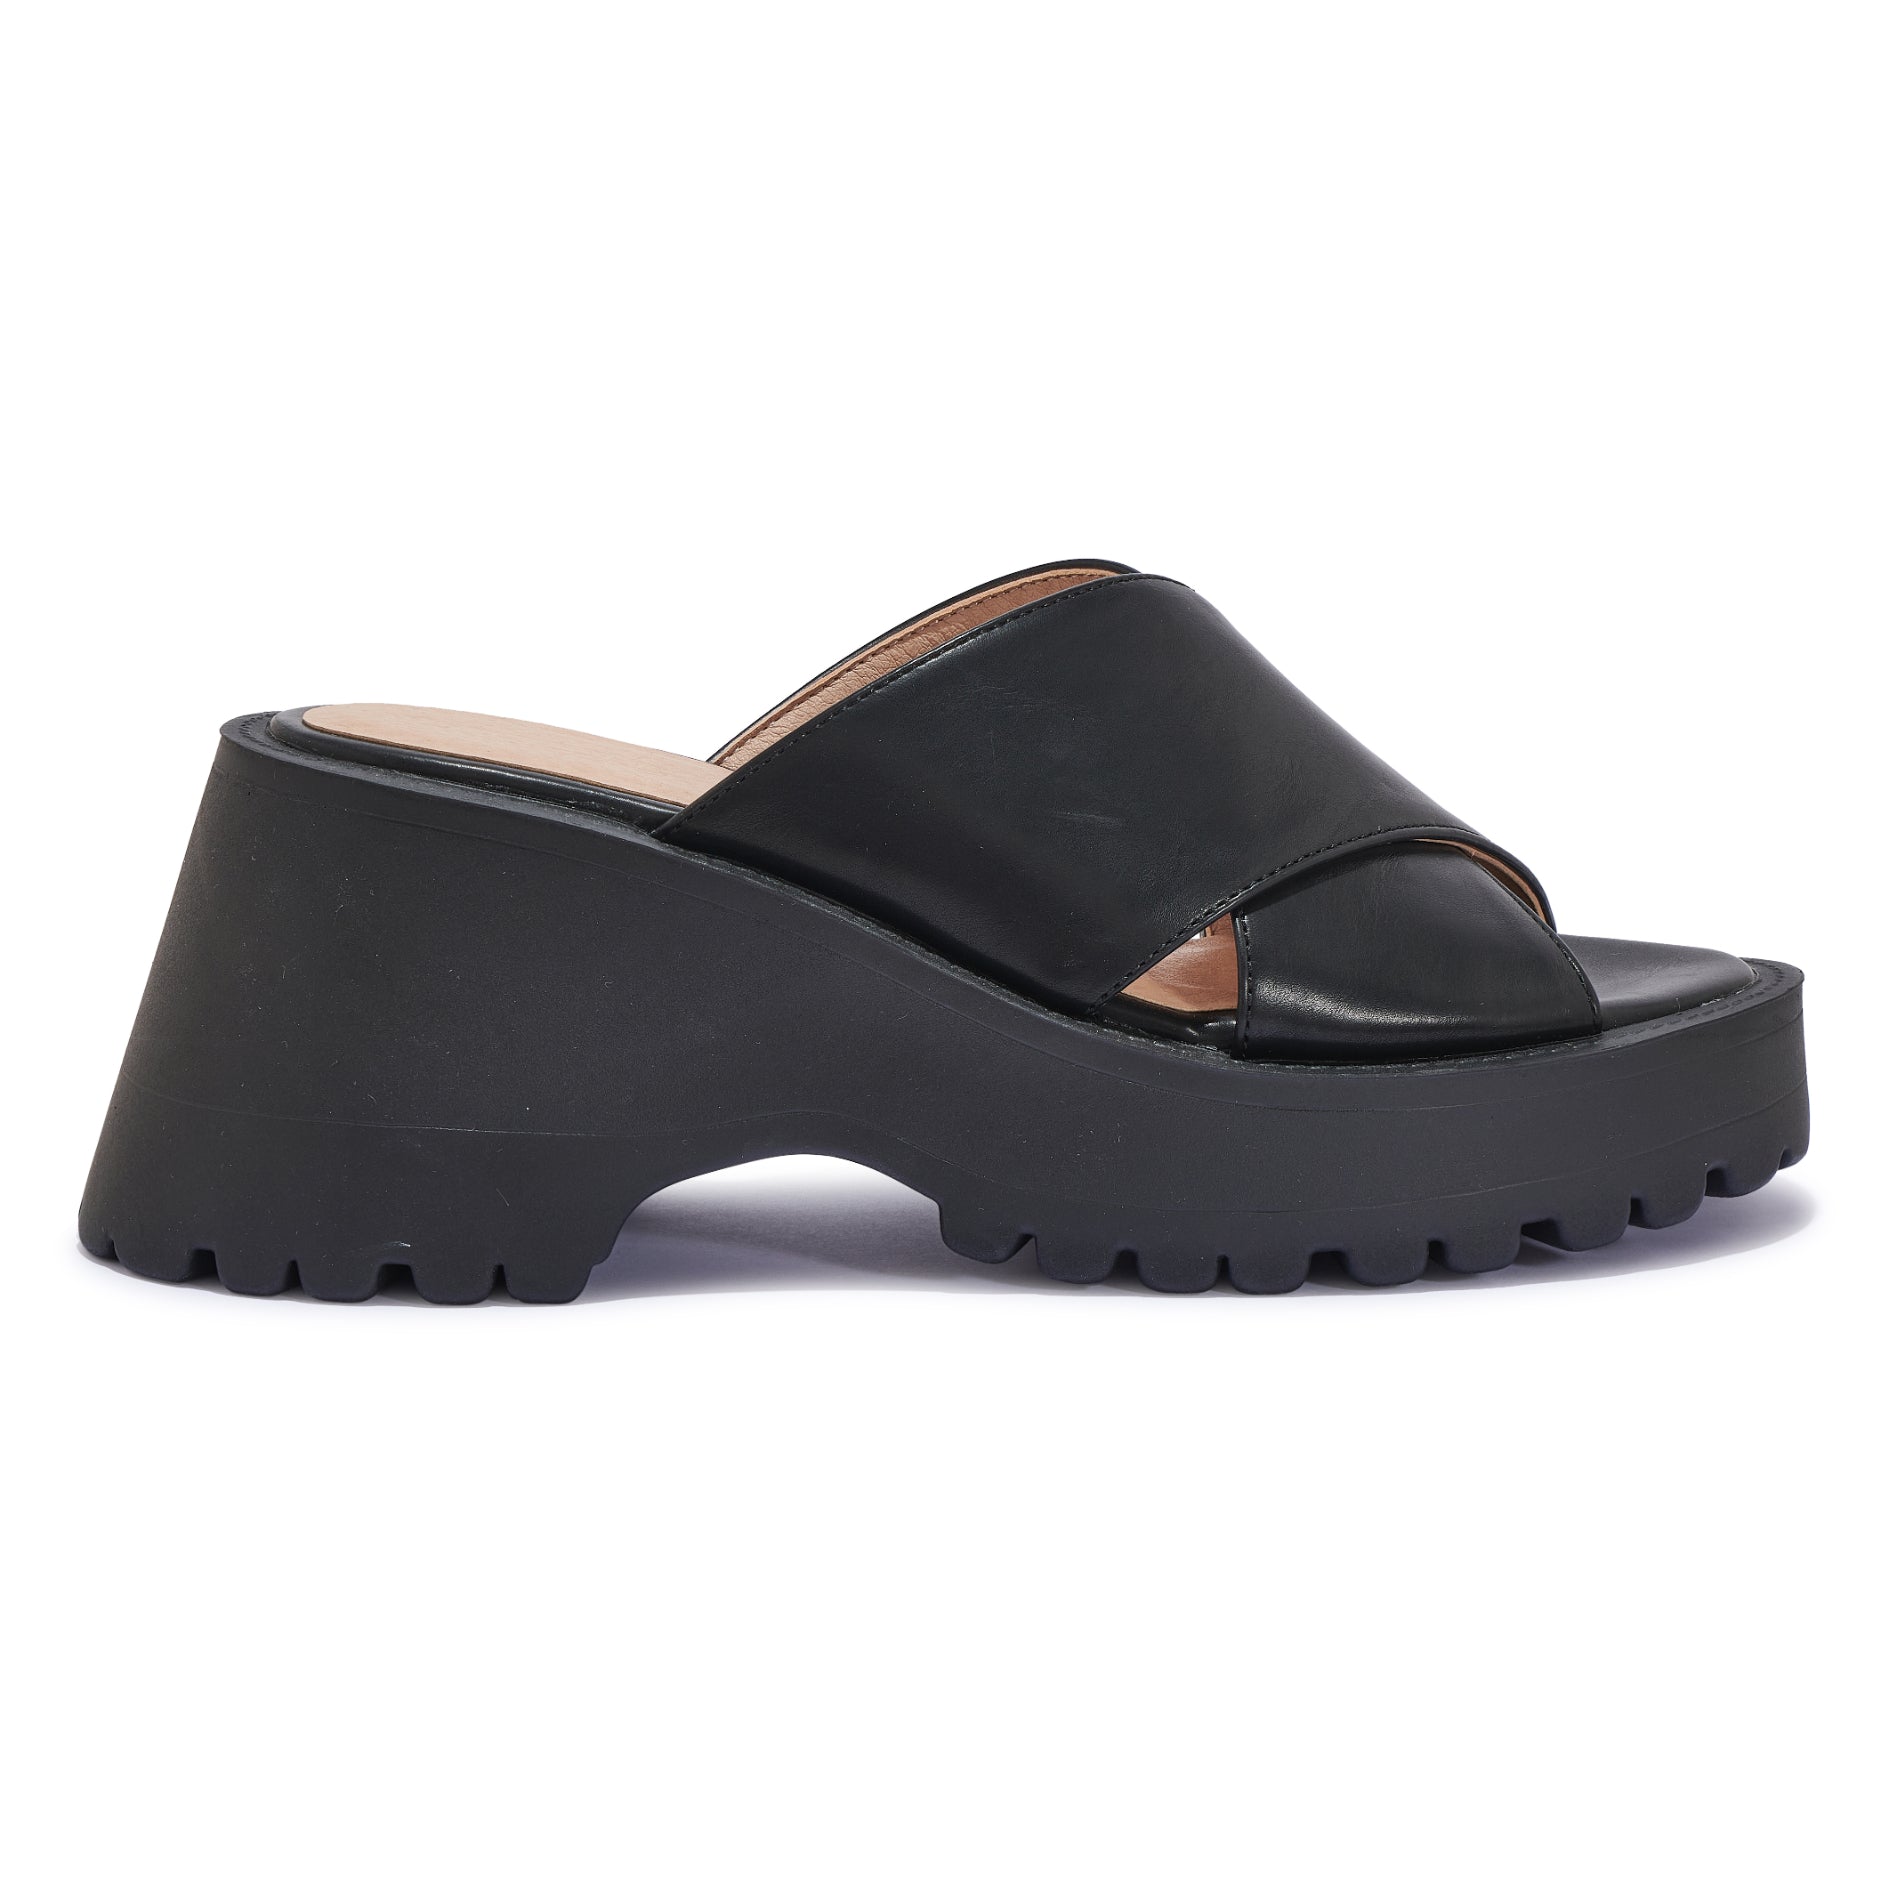 SANZ3 - CROSSOVER STRAP CLEATED WEDGE HEEL SANDAL